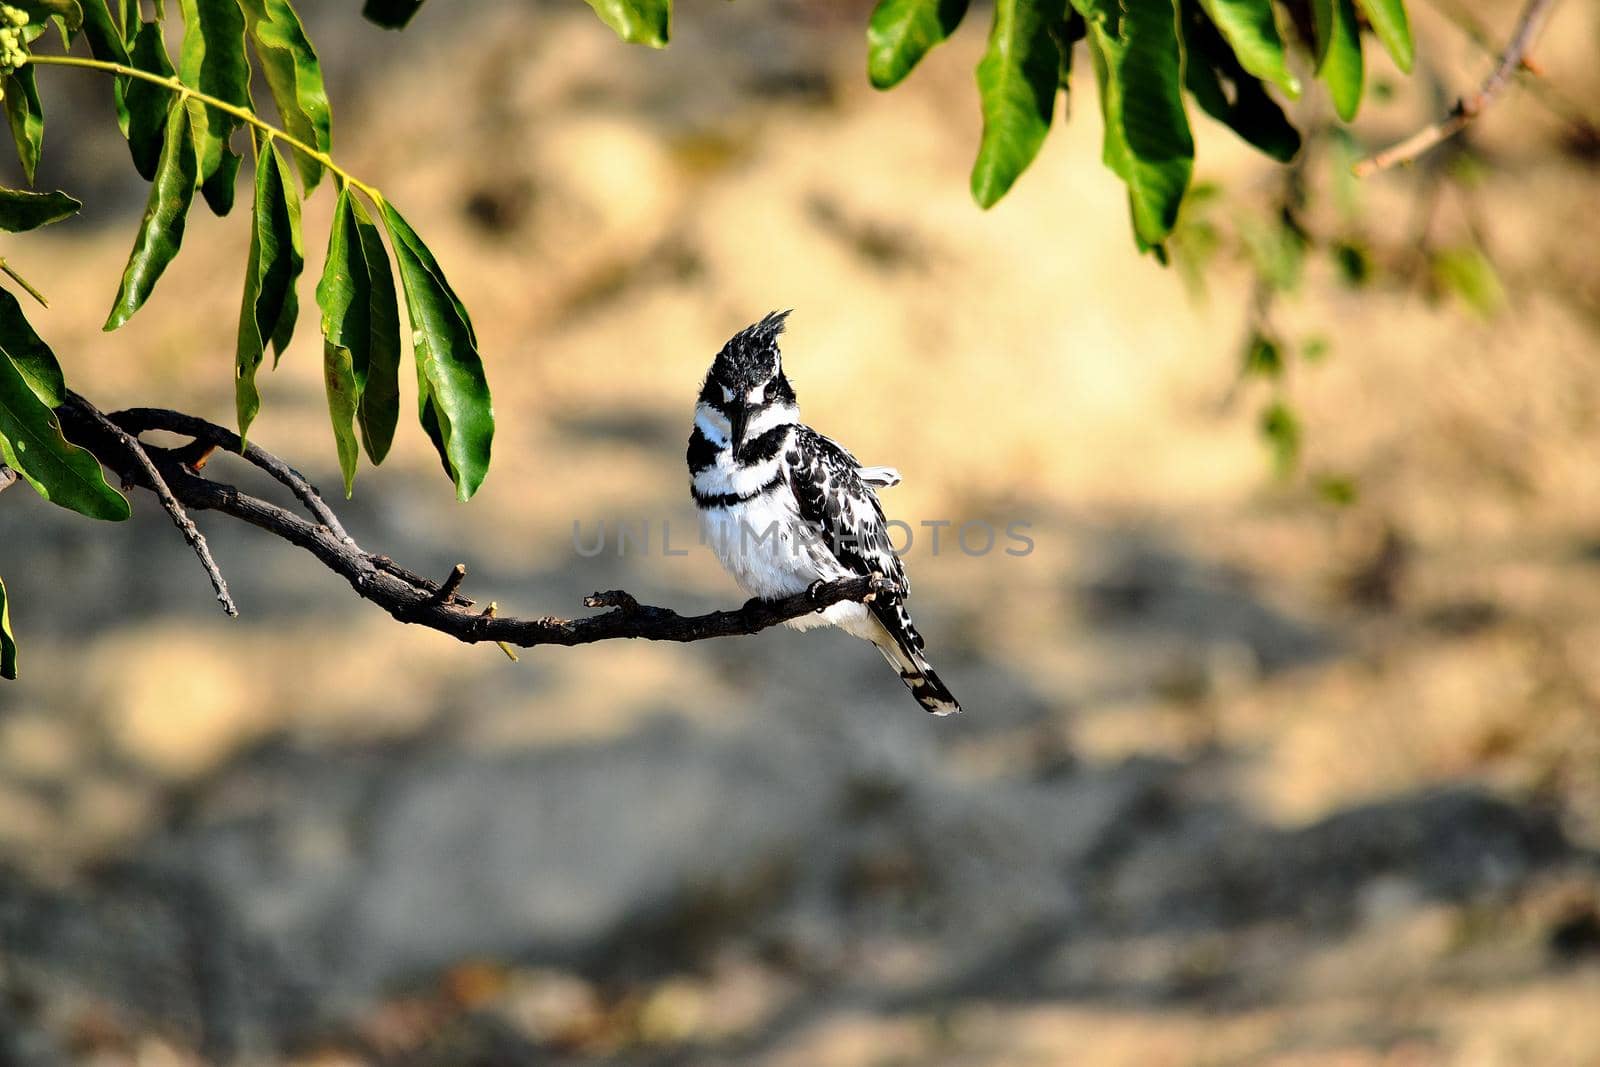 A Pied kingfisher in Chobe National Park by silentstock639